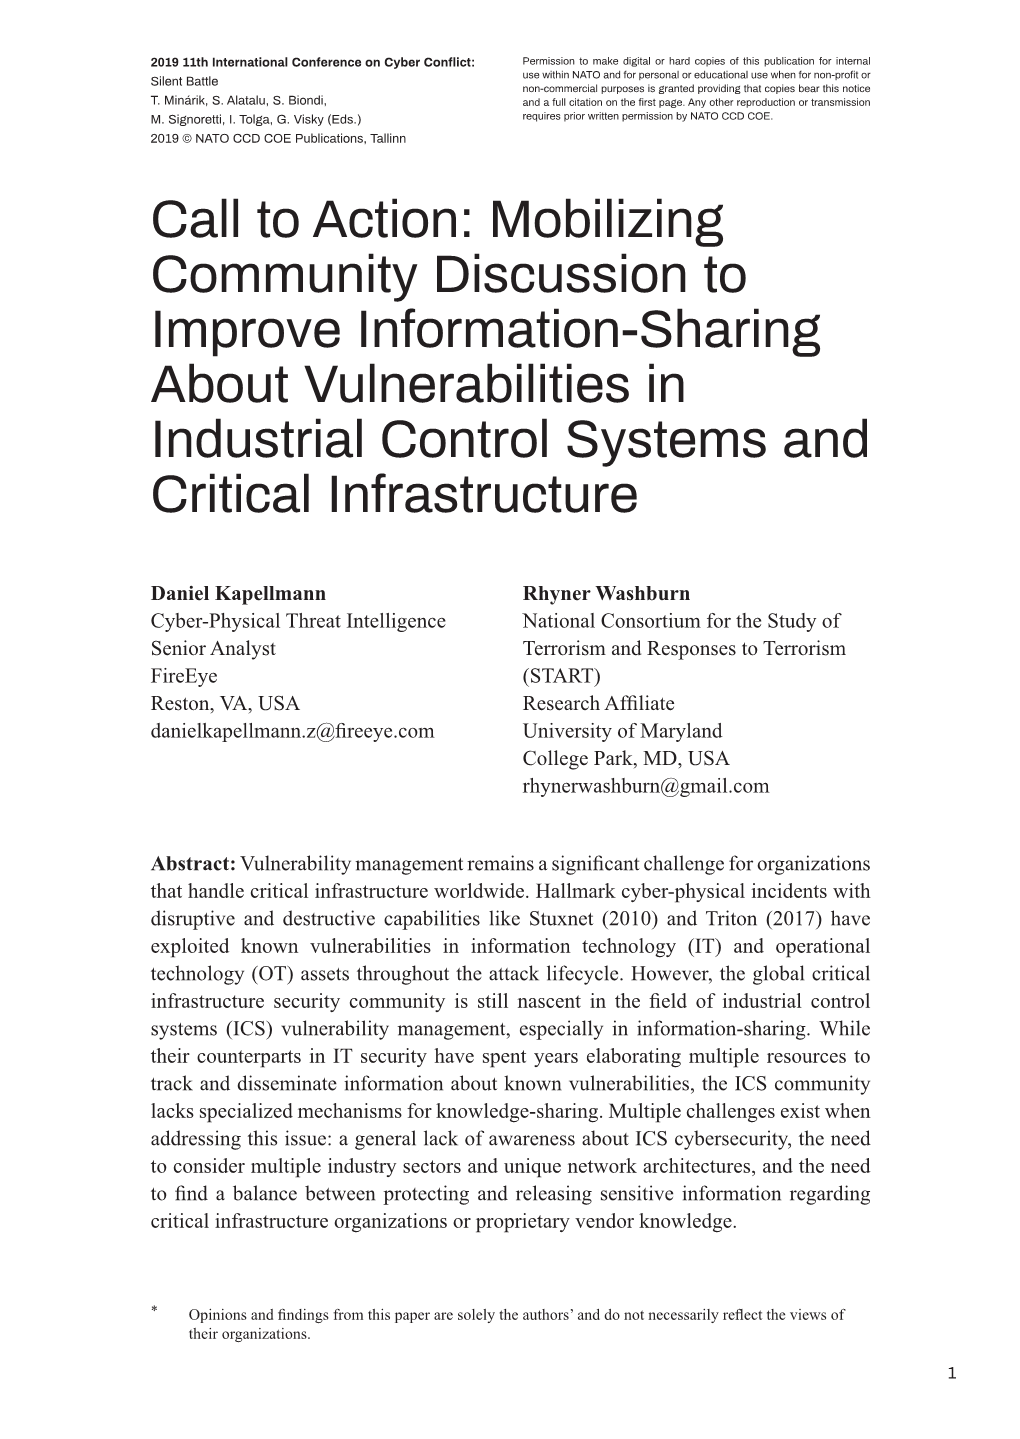 Call to Action: Mobilizing Community Discussion to Improve Information-Sharing About Vulnerabilities in Industrial Control Systems and Critical Infrastructure